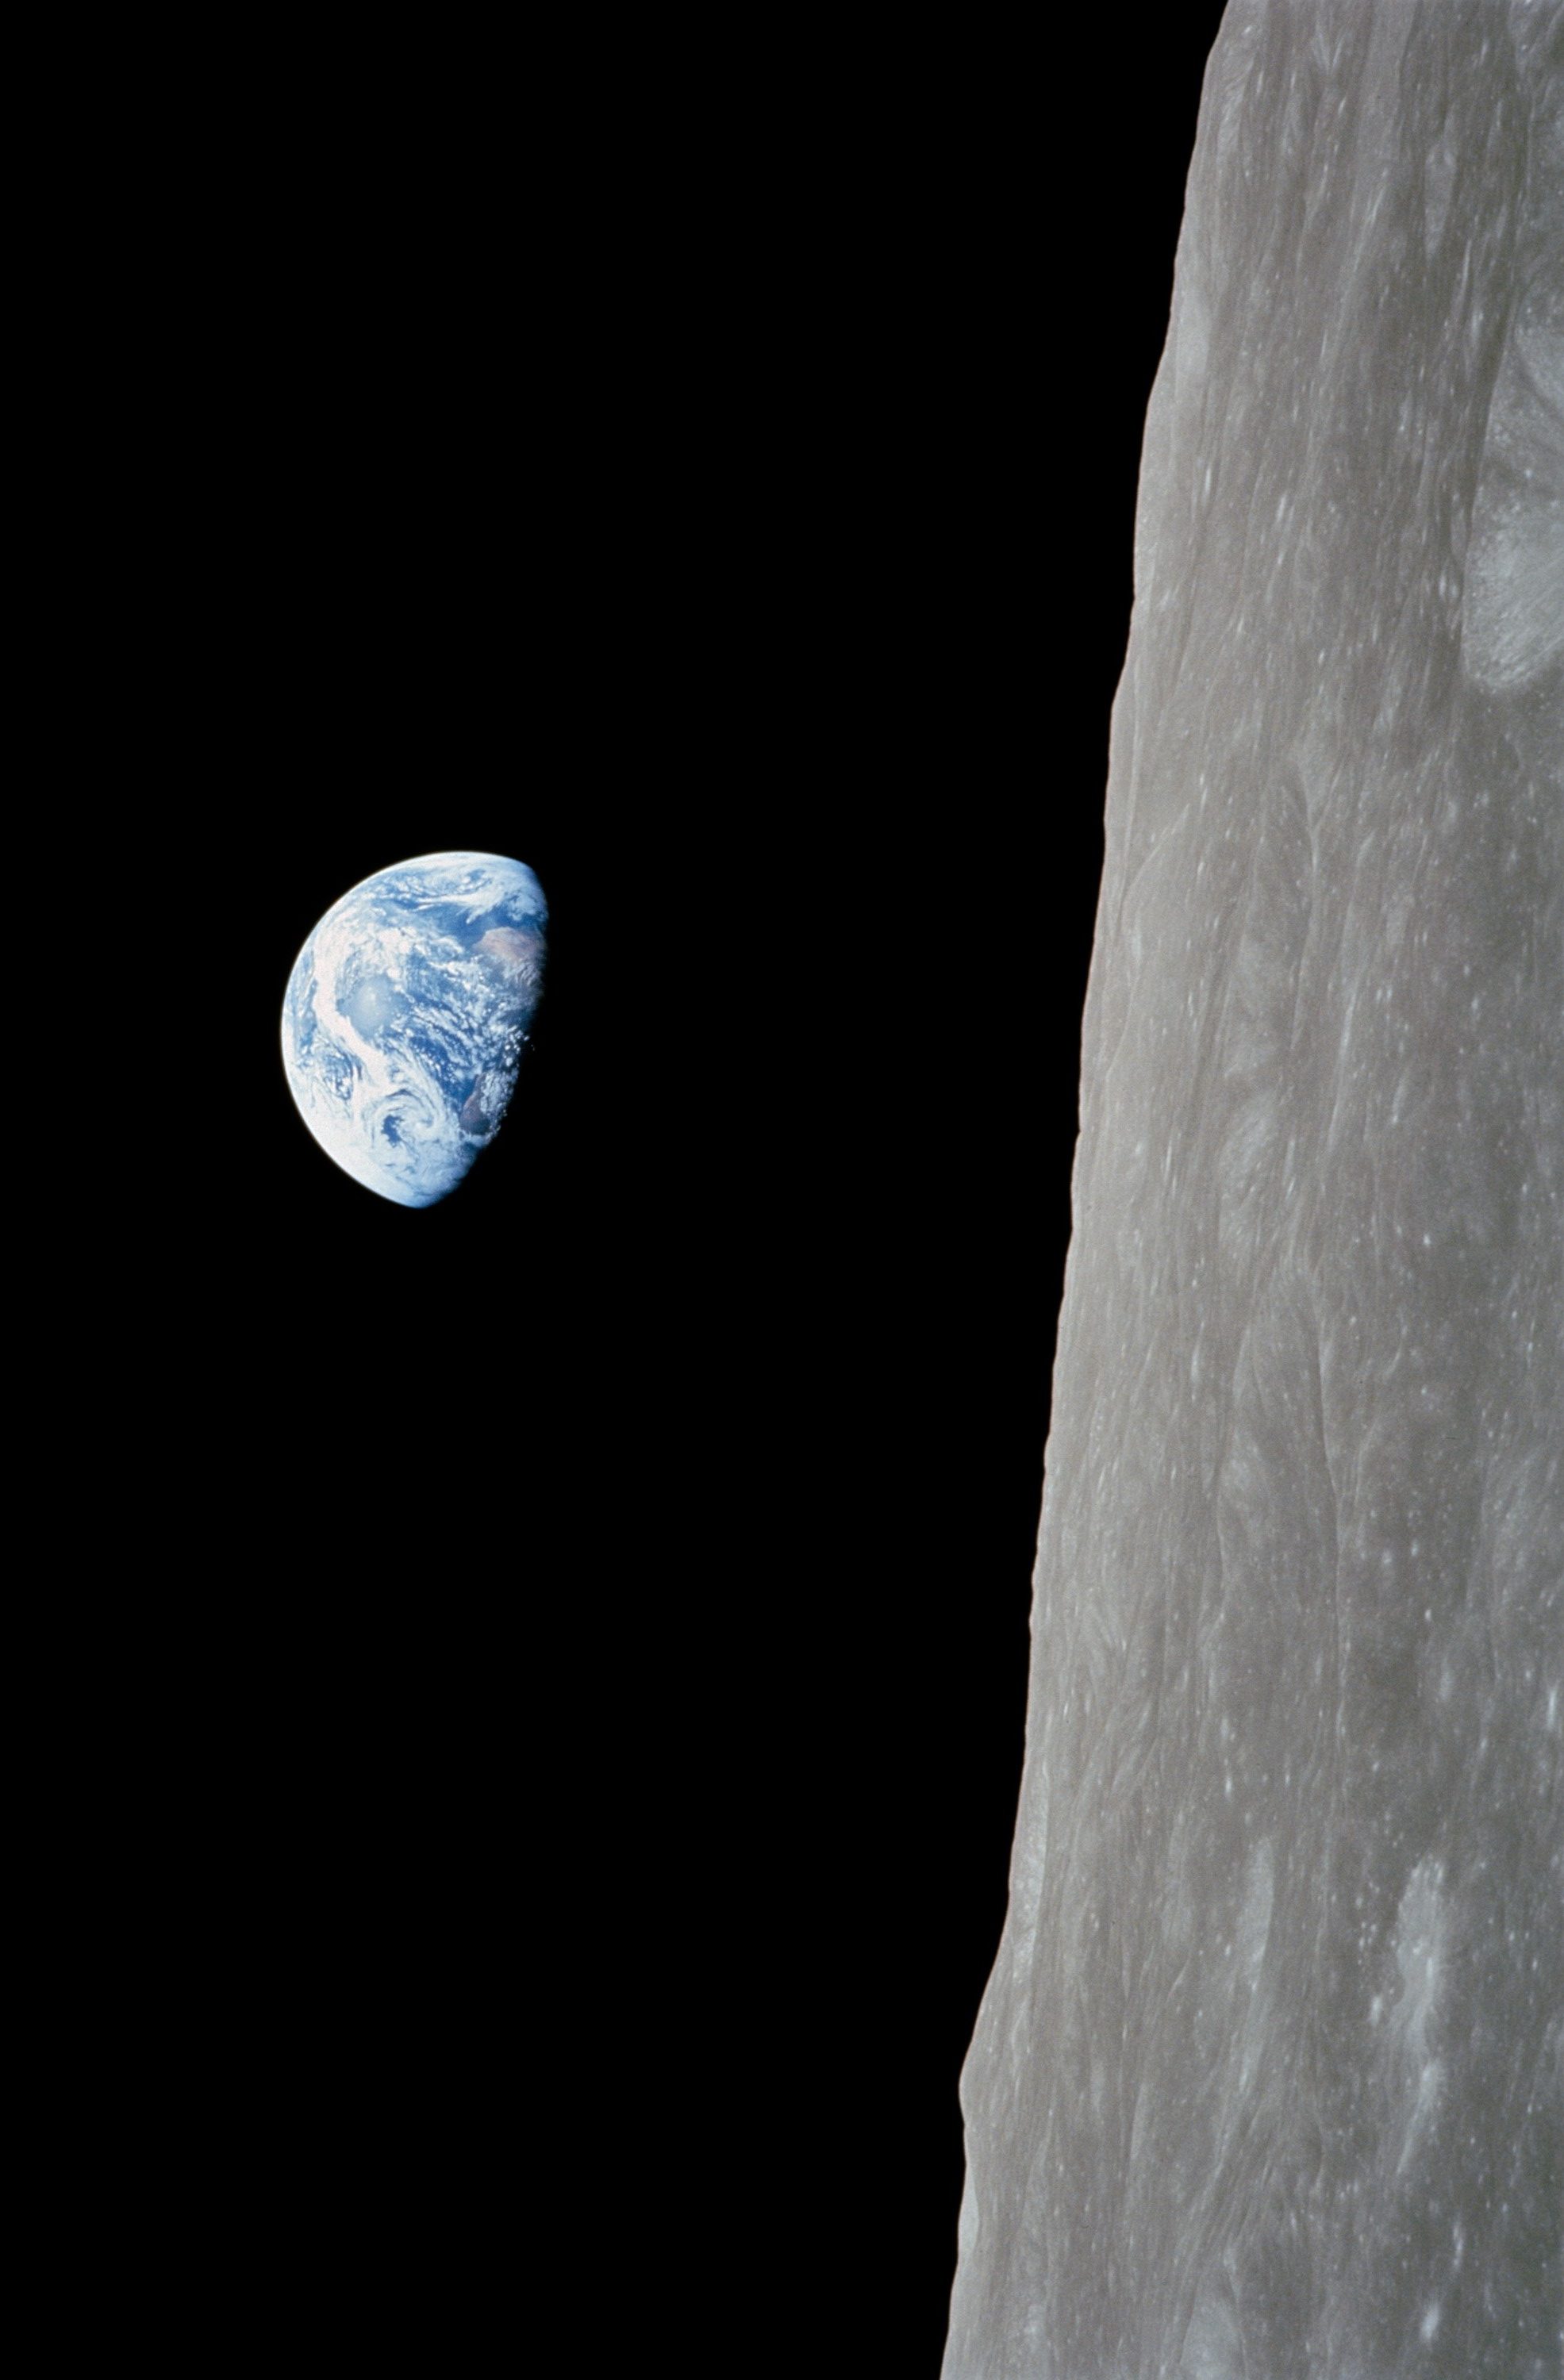 The famous Earthrise photograph taken during the Apollo 8 crew's first orbit around the Moon in 1968